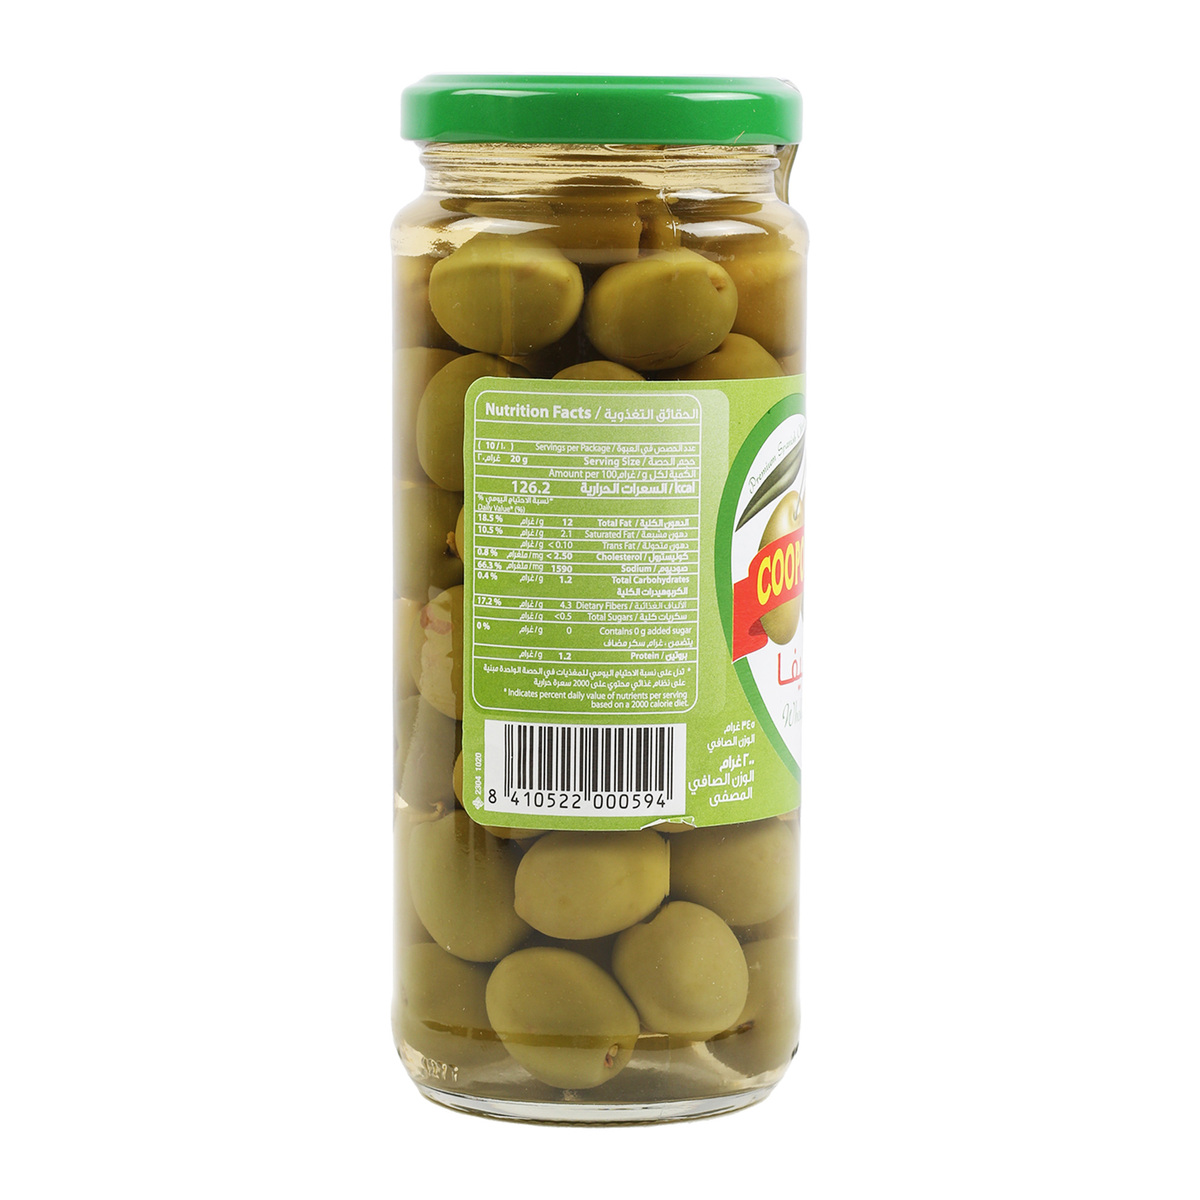 Coopoliva Spanish Whole Green Olives 345g